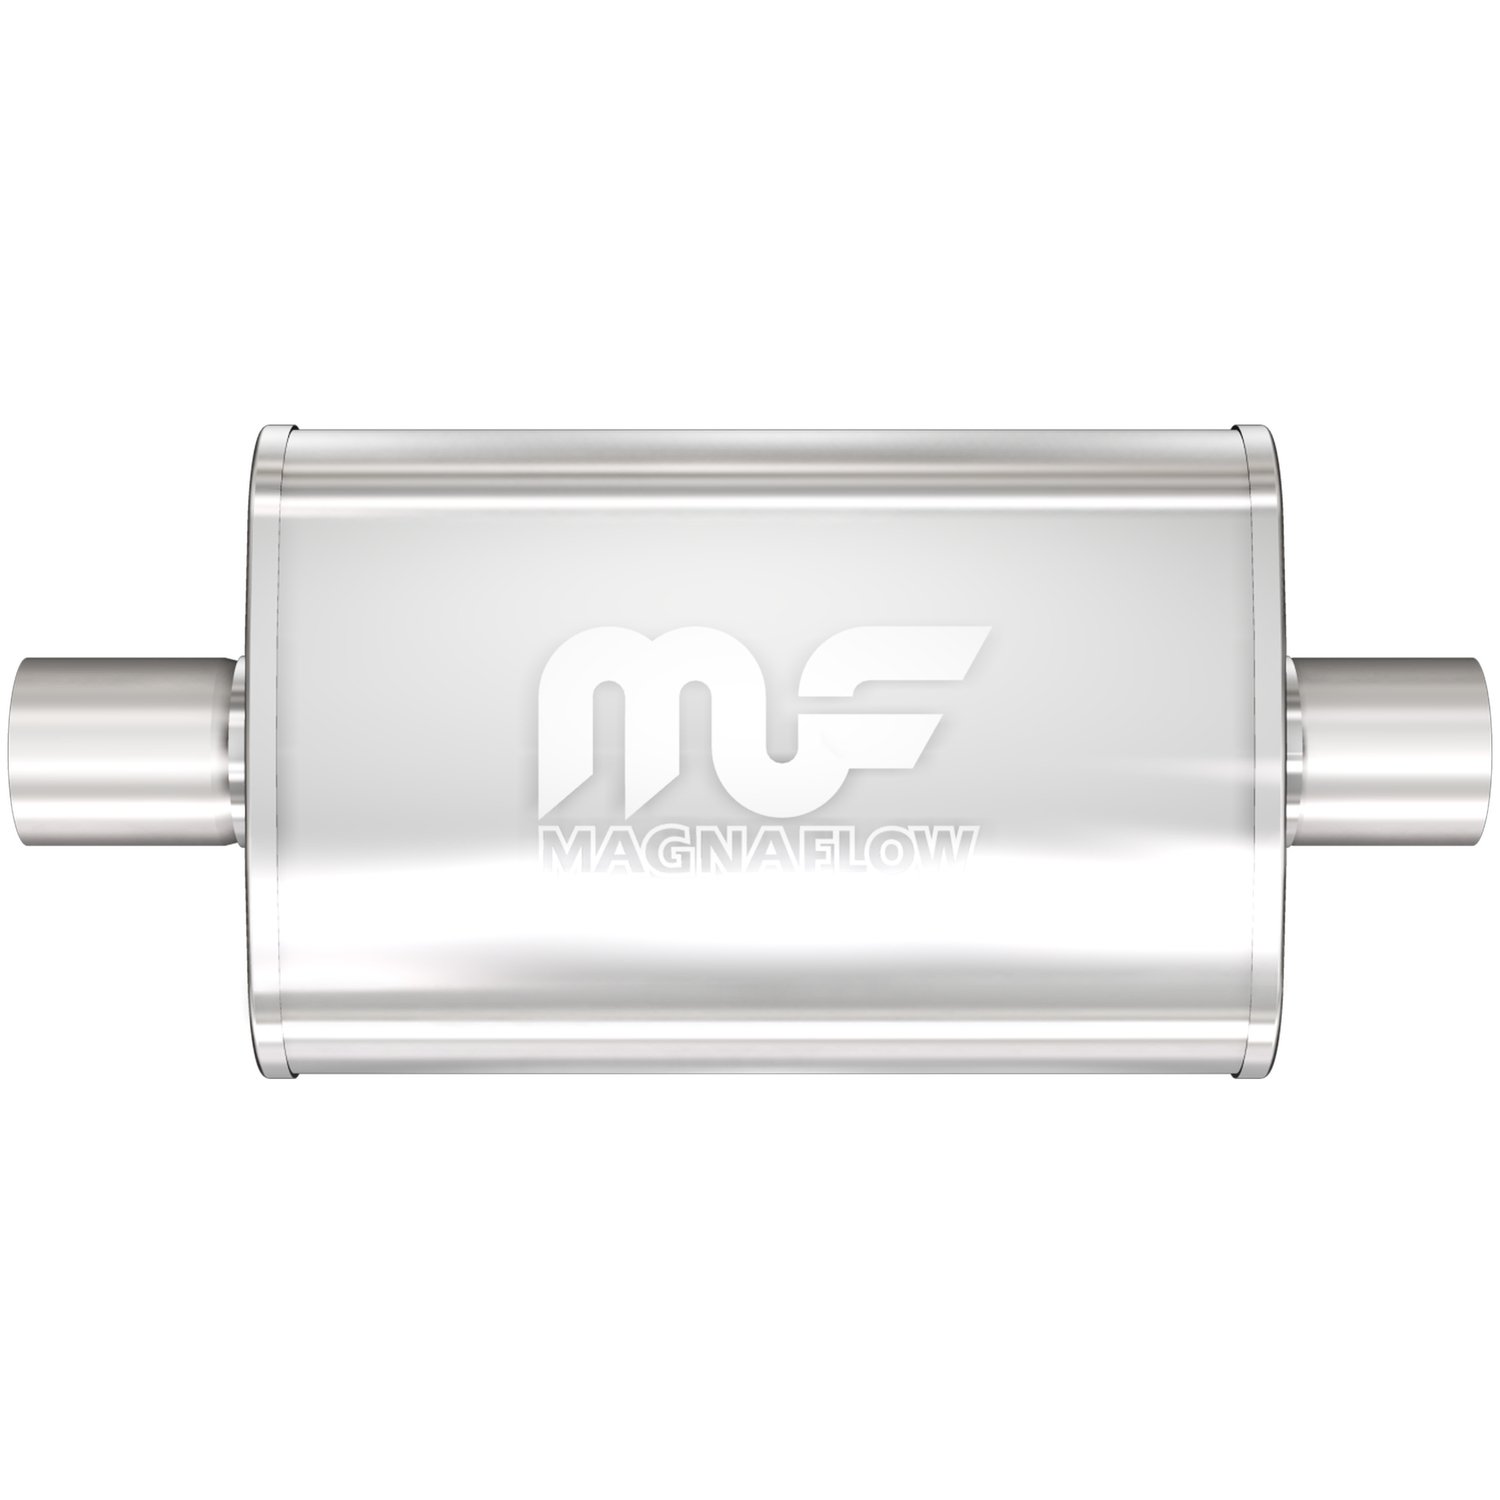 3.5" x 7" Oval Muffler Center In/Center Out: 2" /2" Body Length: 14" Overall Length: 20" Core Size: 2" Satin Finish